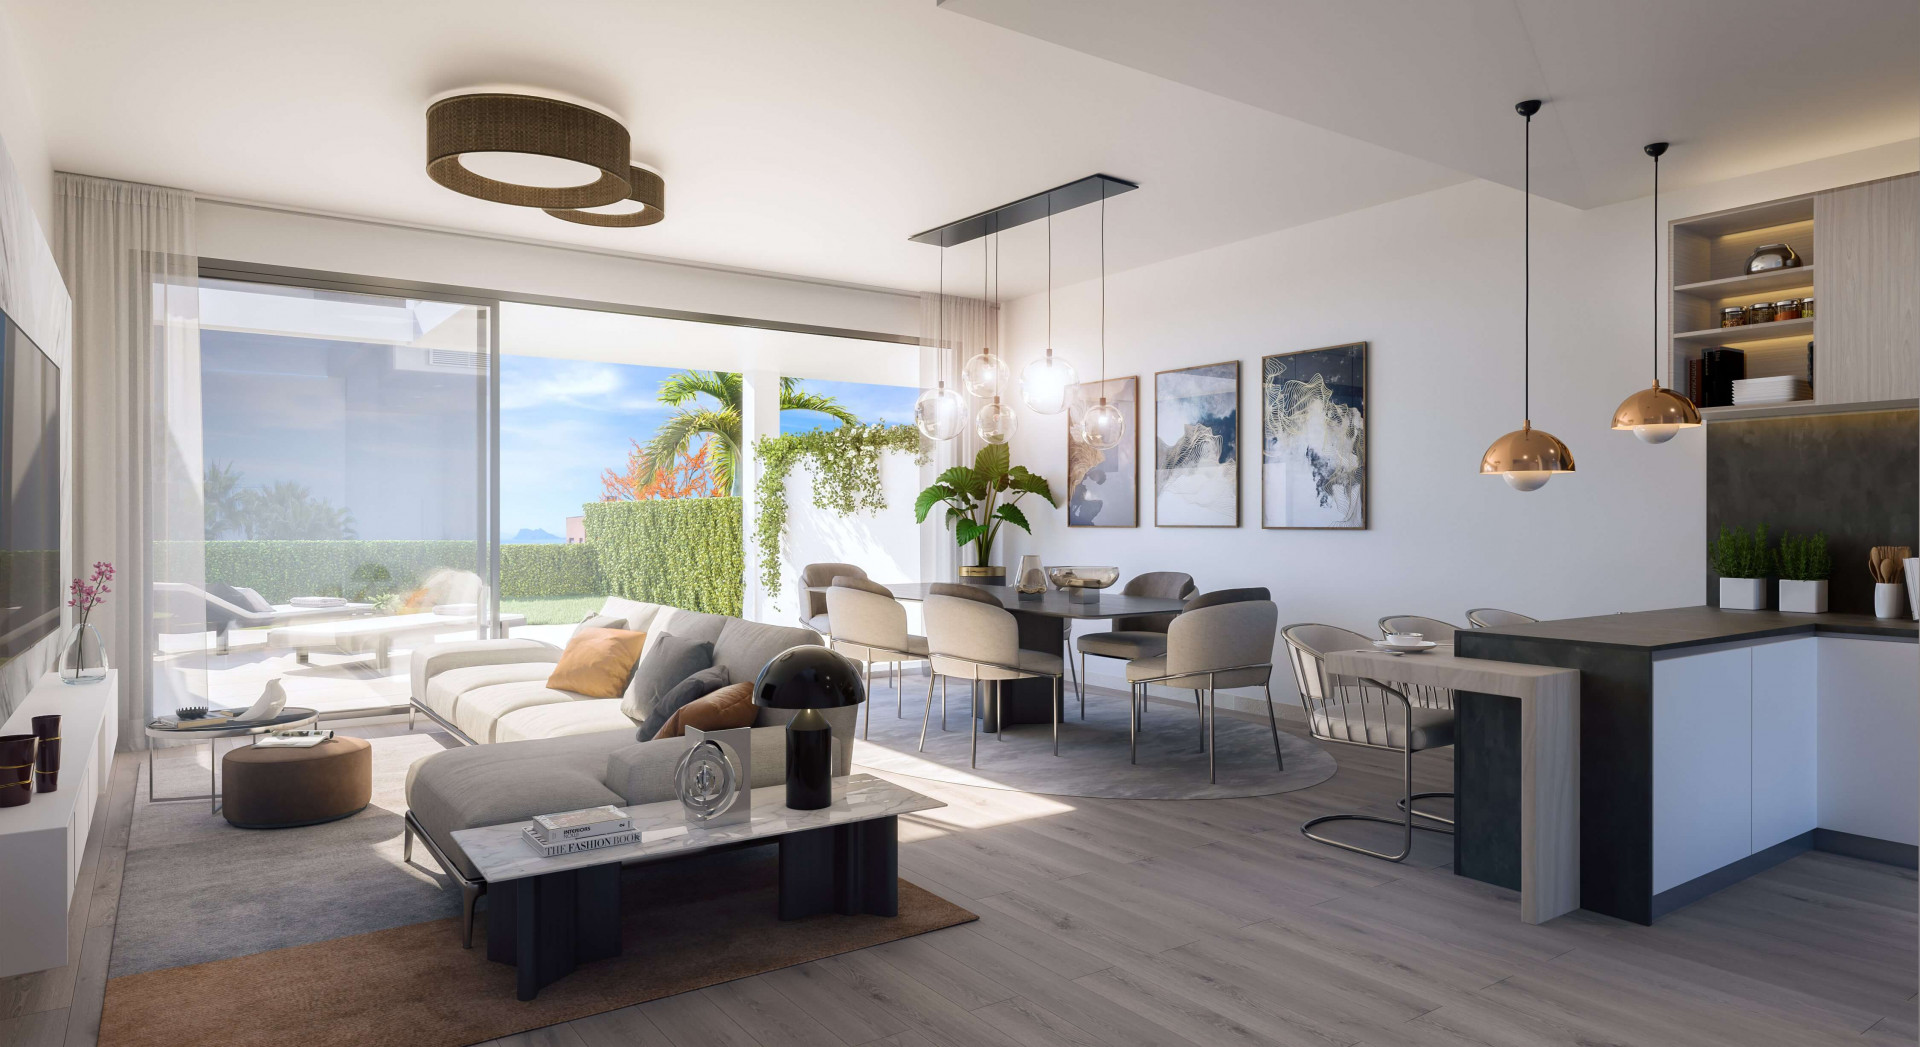 Golden View II: Contemporary style townhouses in Manilva with spectacular seaviews | Image 4